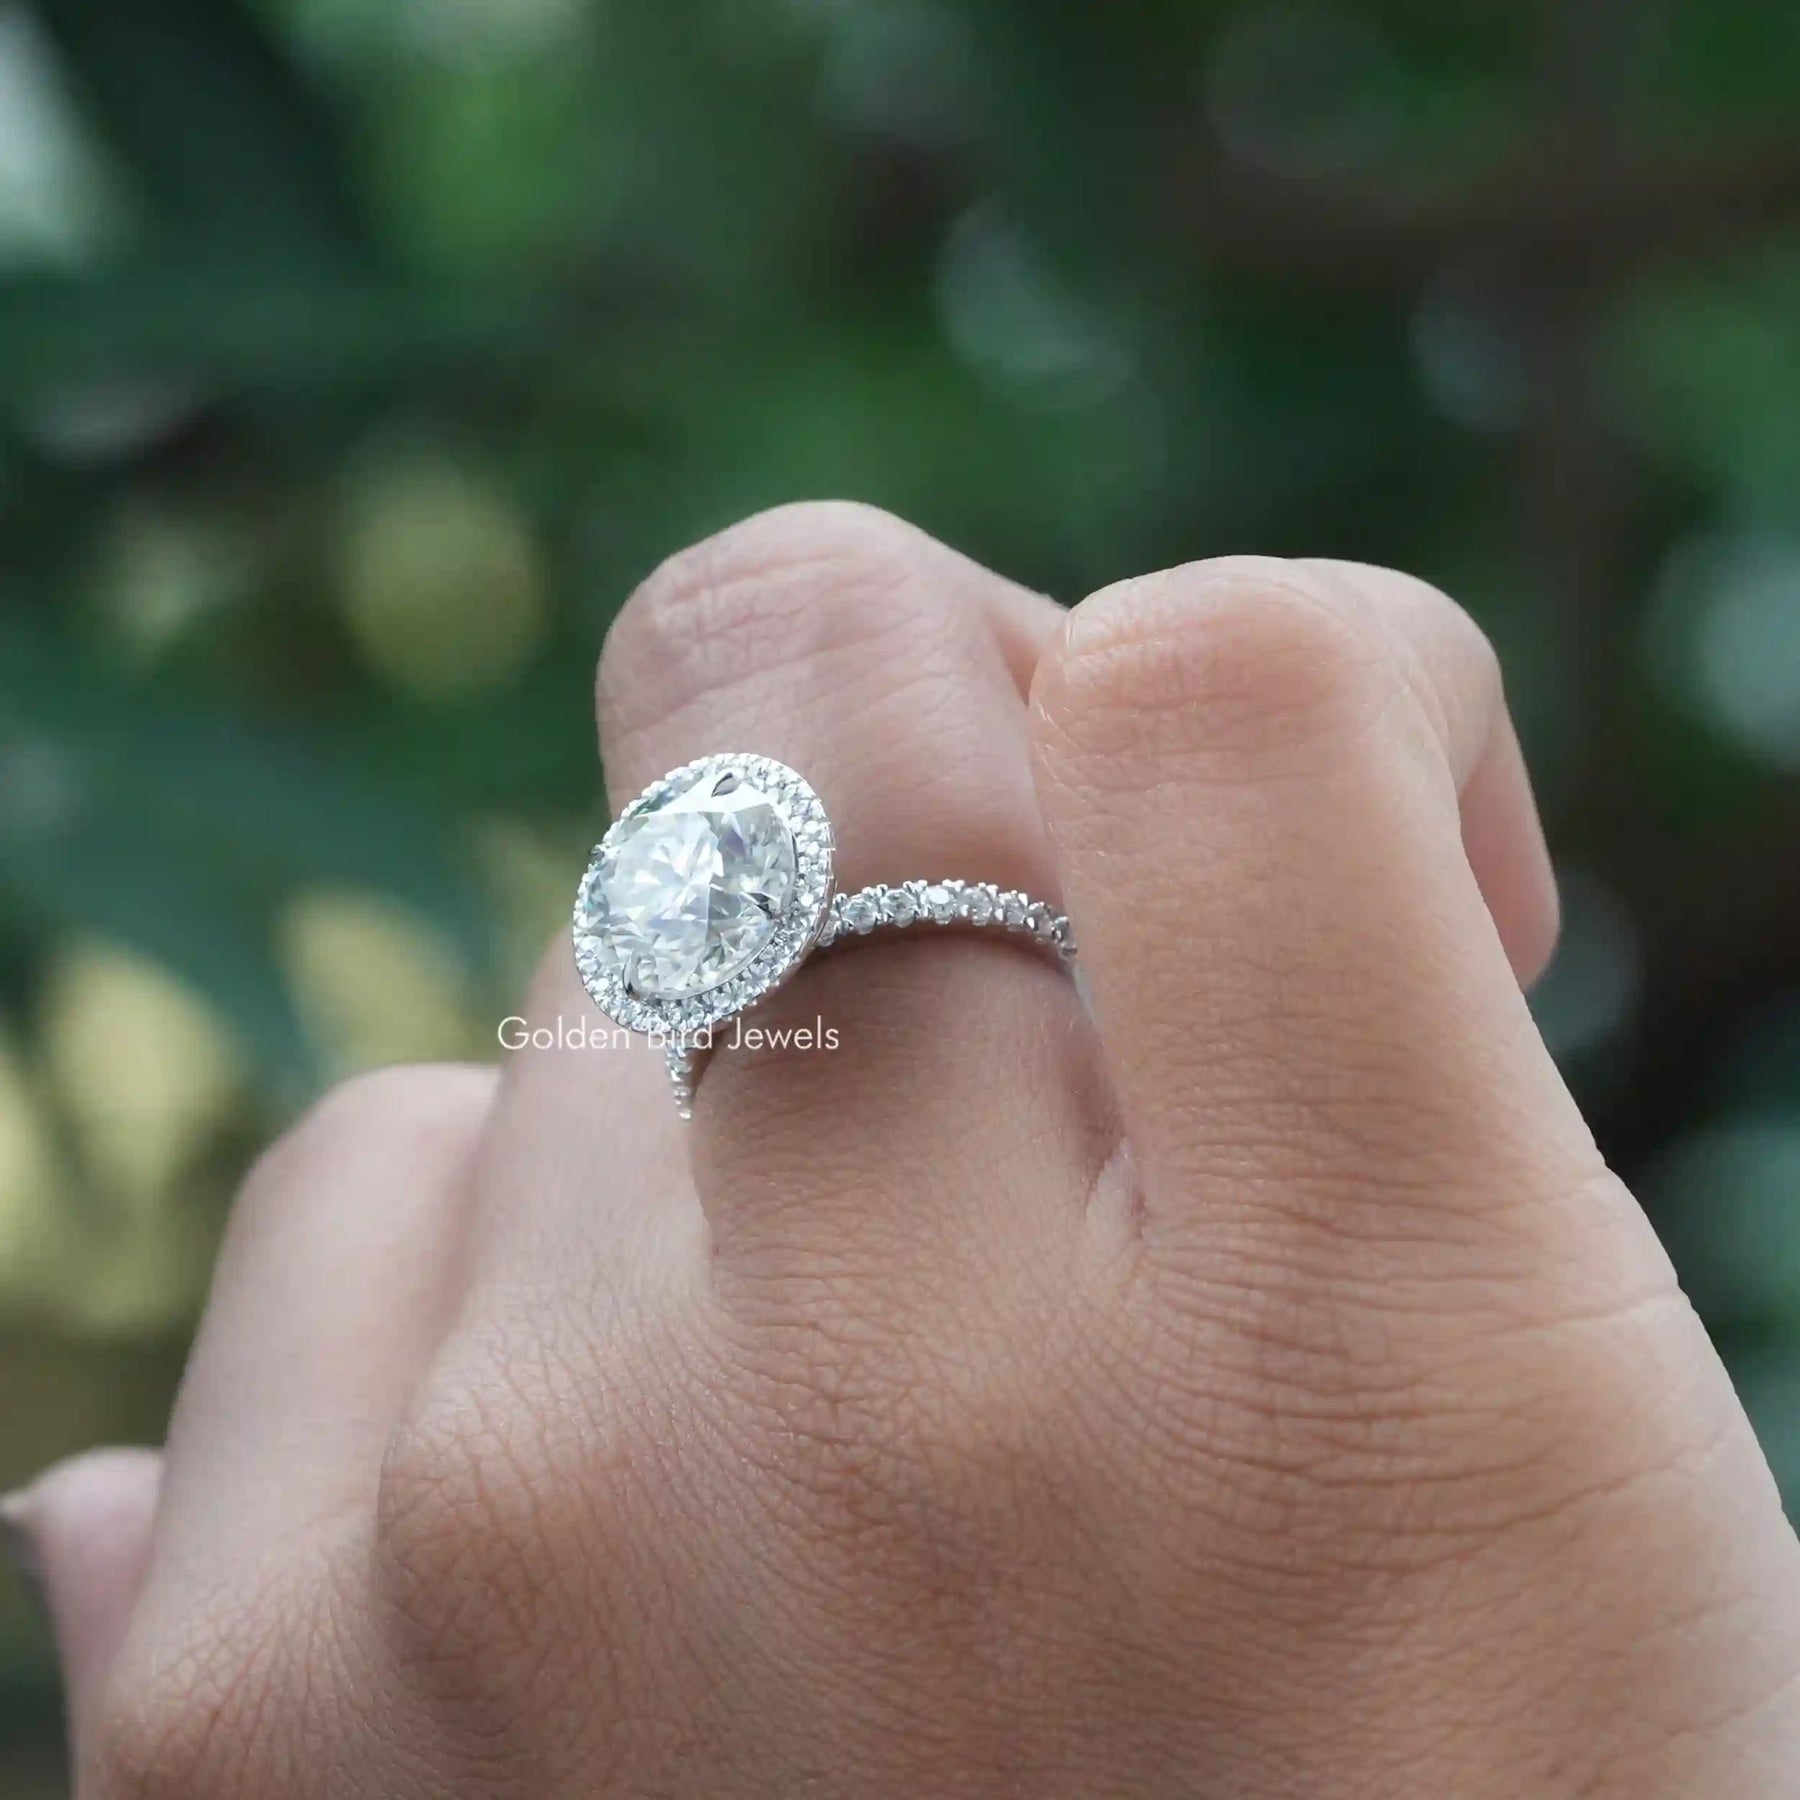 [White gold round cut moissanite ring made of prong setting]-[Golden Bird Jewels]